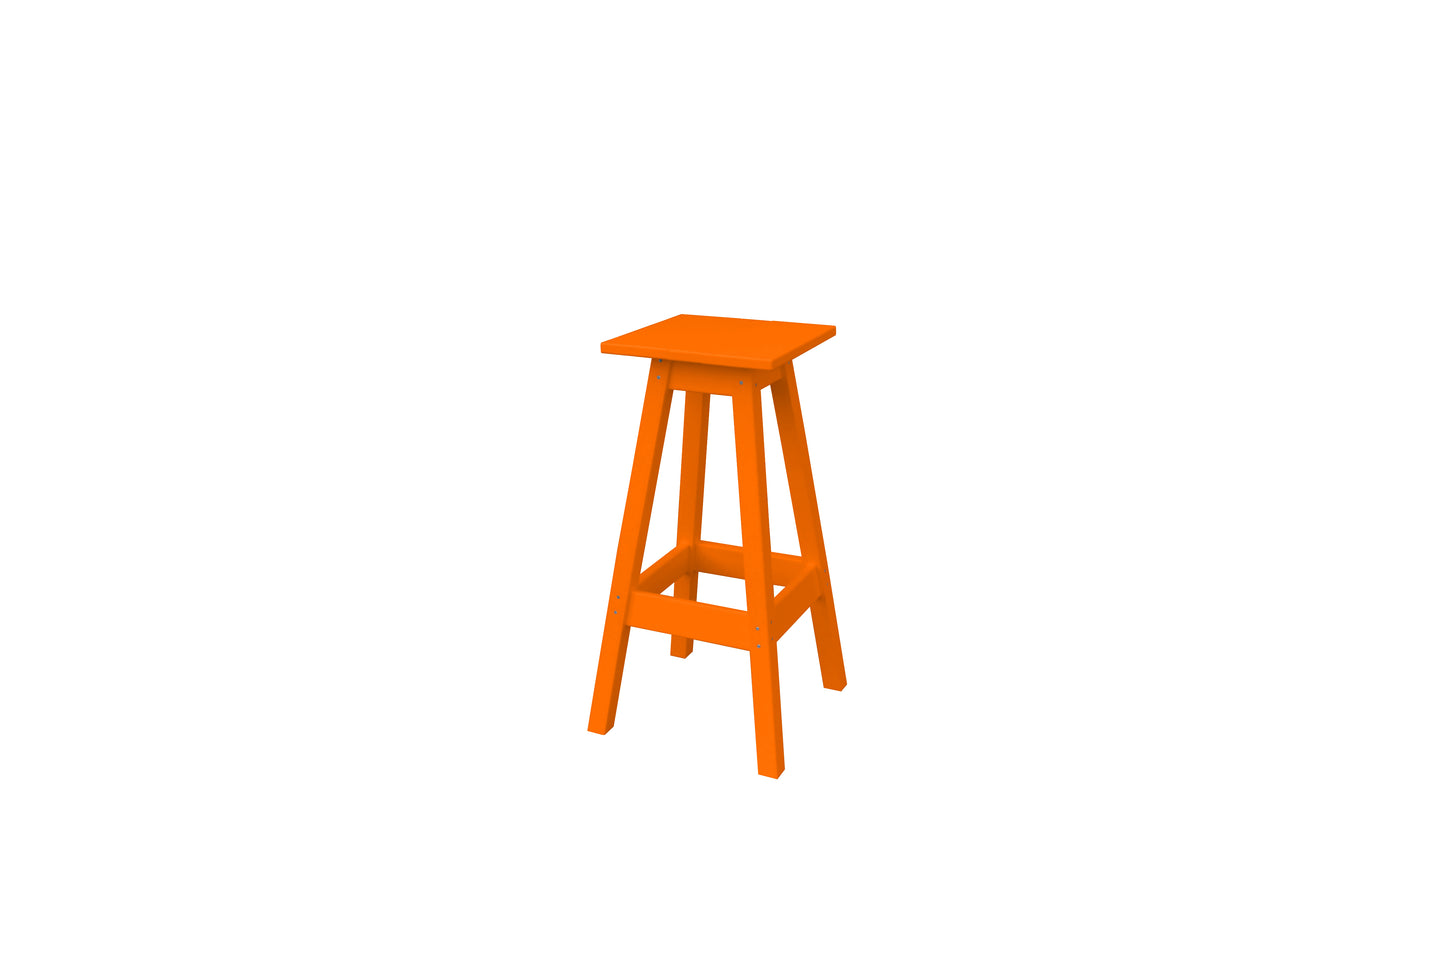 A&L Furniture Co. Recycled Plastic Square Bar Stool - LEAD TIME TO SHIP 10 BUSINESS DAYS